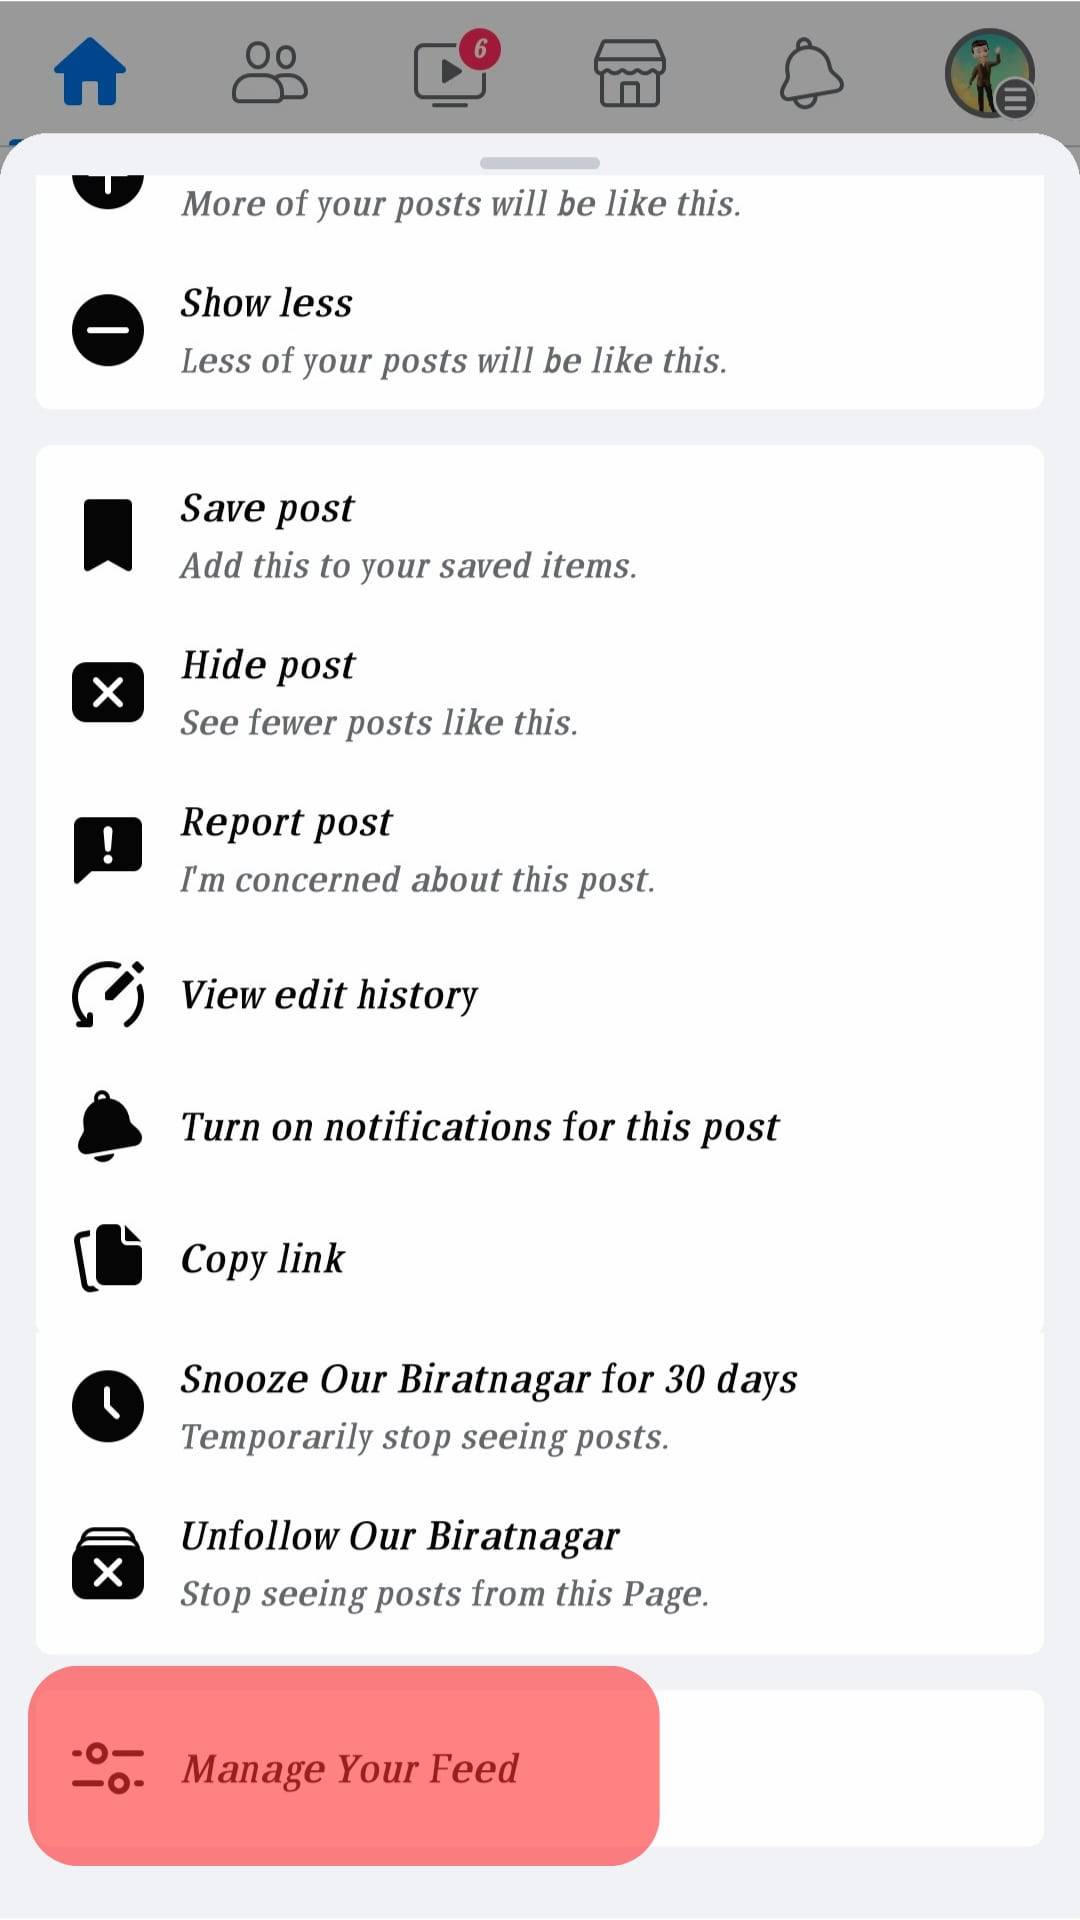 Select The Manage Your Feed Option